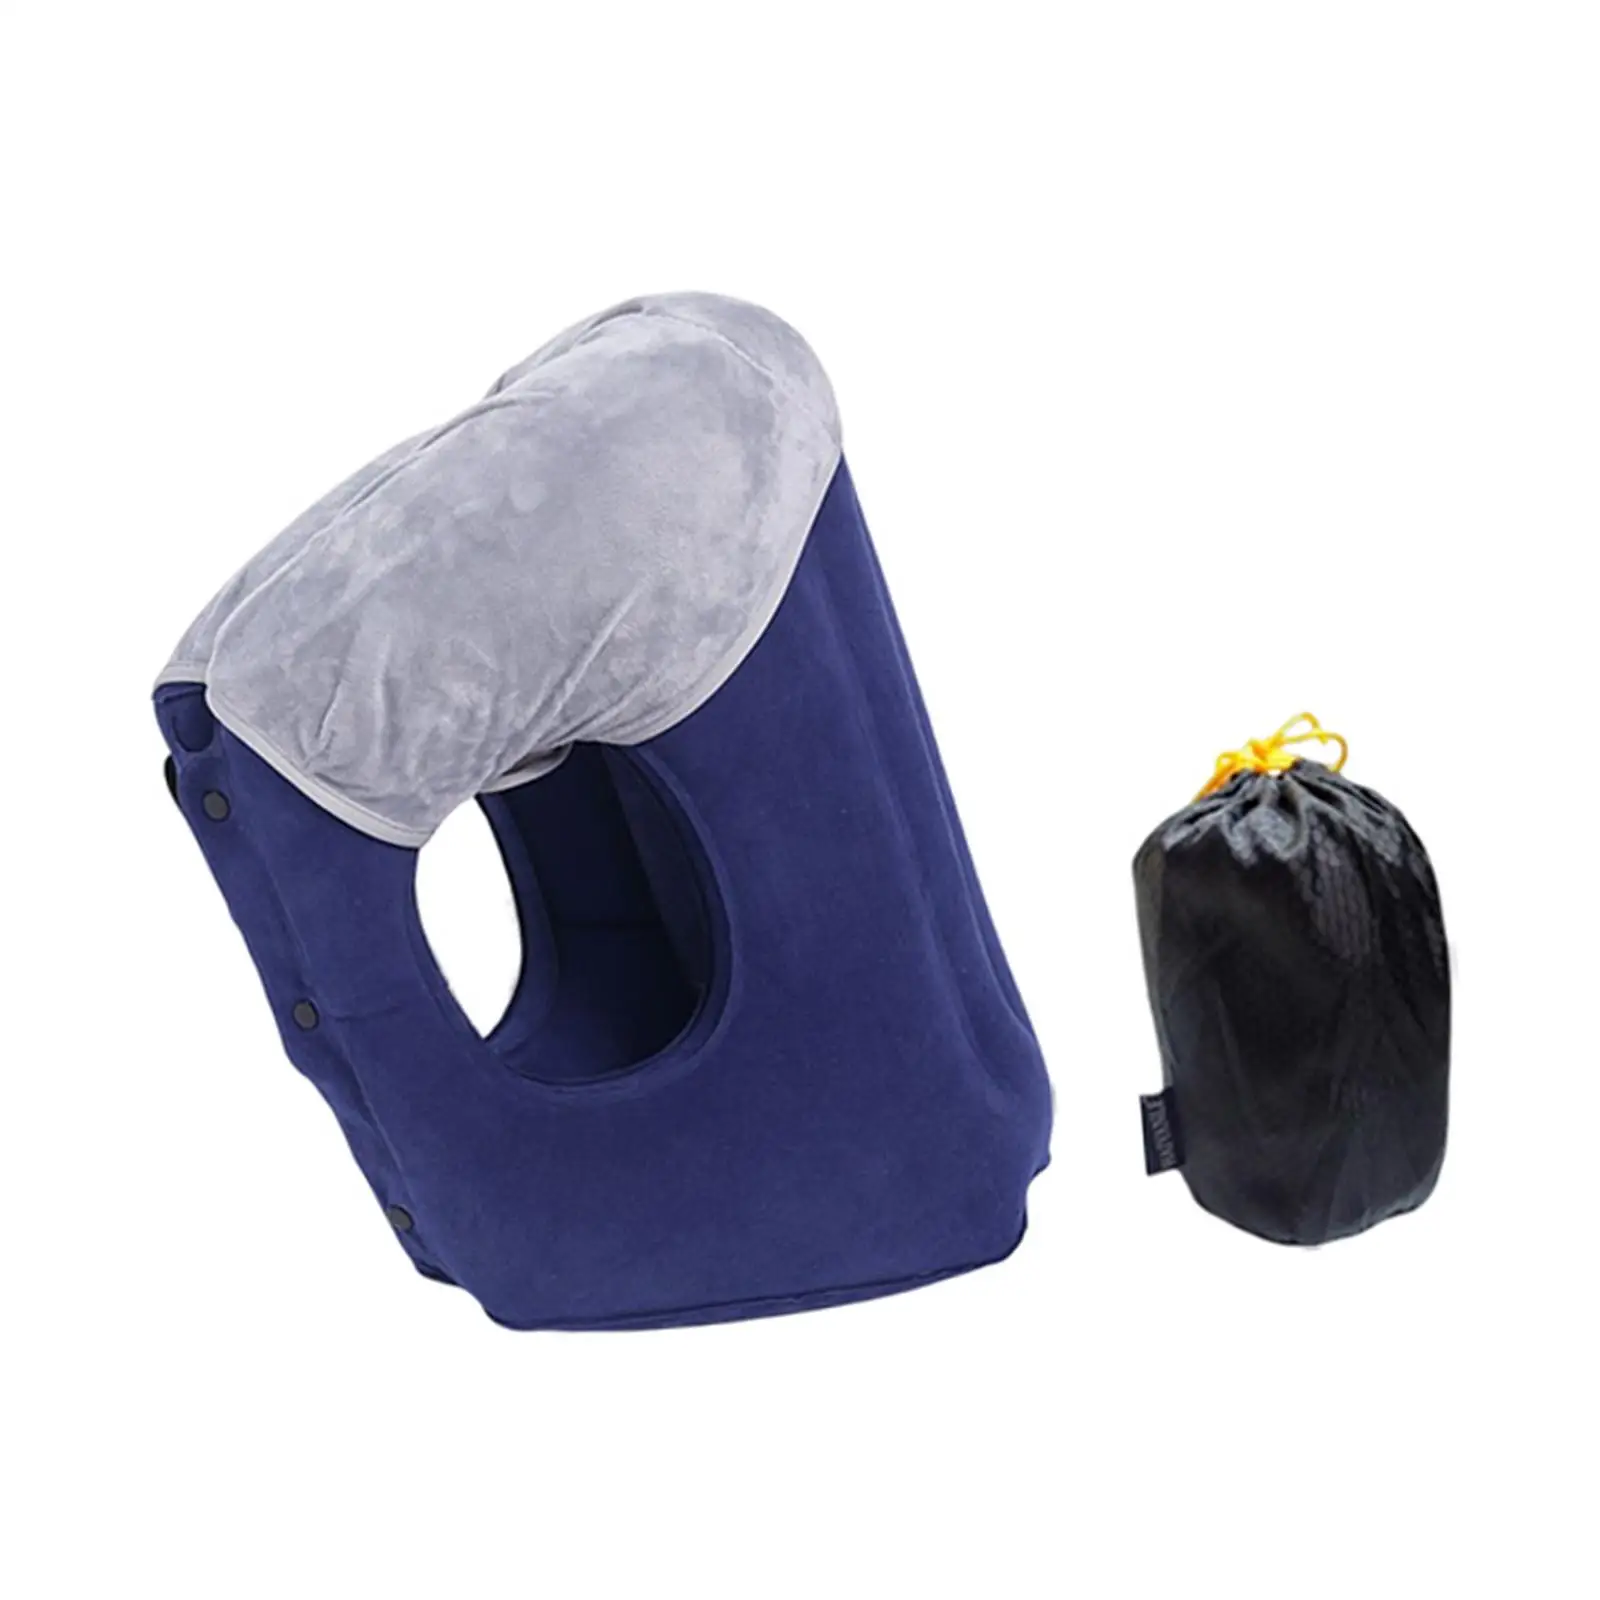 Folding Inflatable Travel Pillow with Drawstring Bag Comfortably Support Head Inflatable Air Pillow for Car Train Sleeping